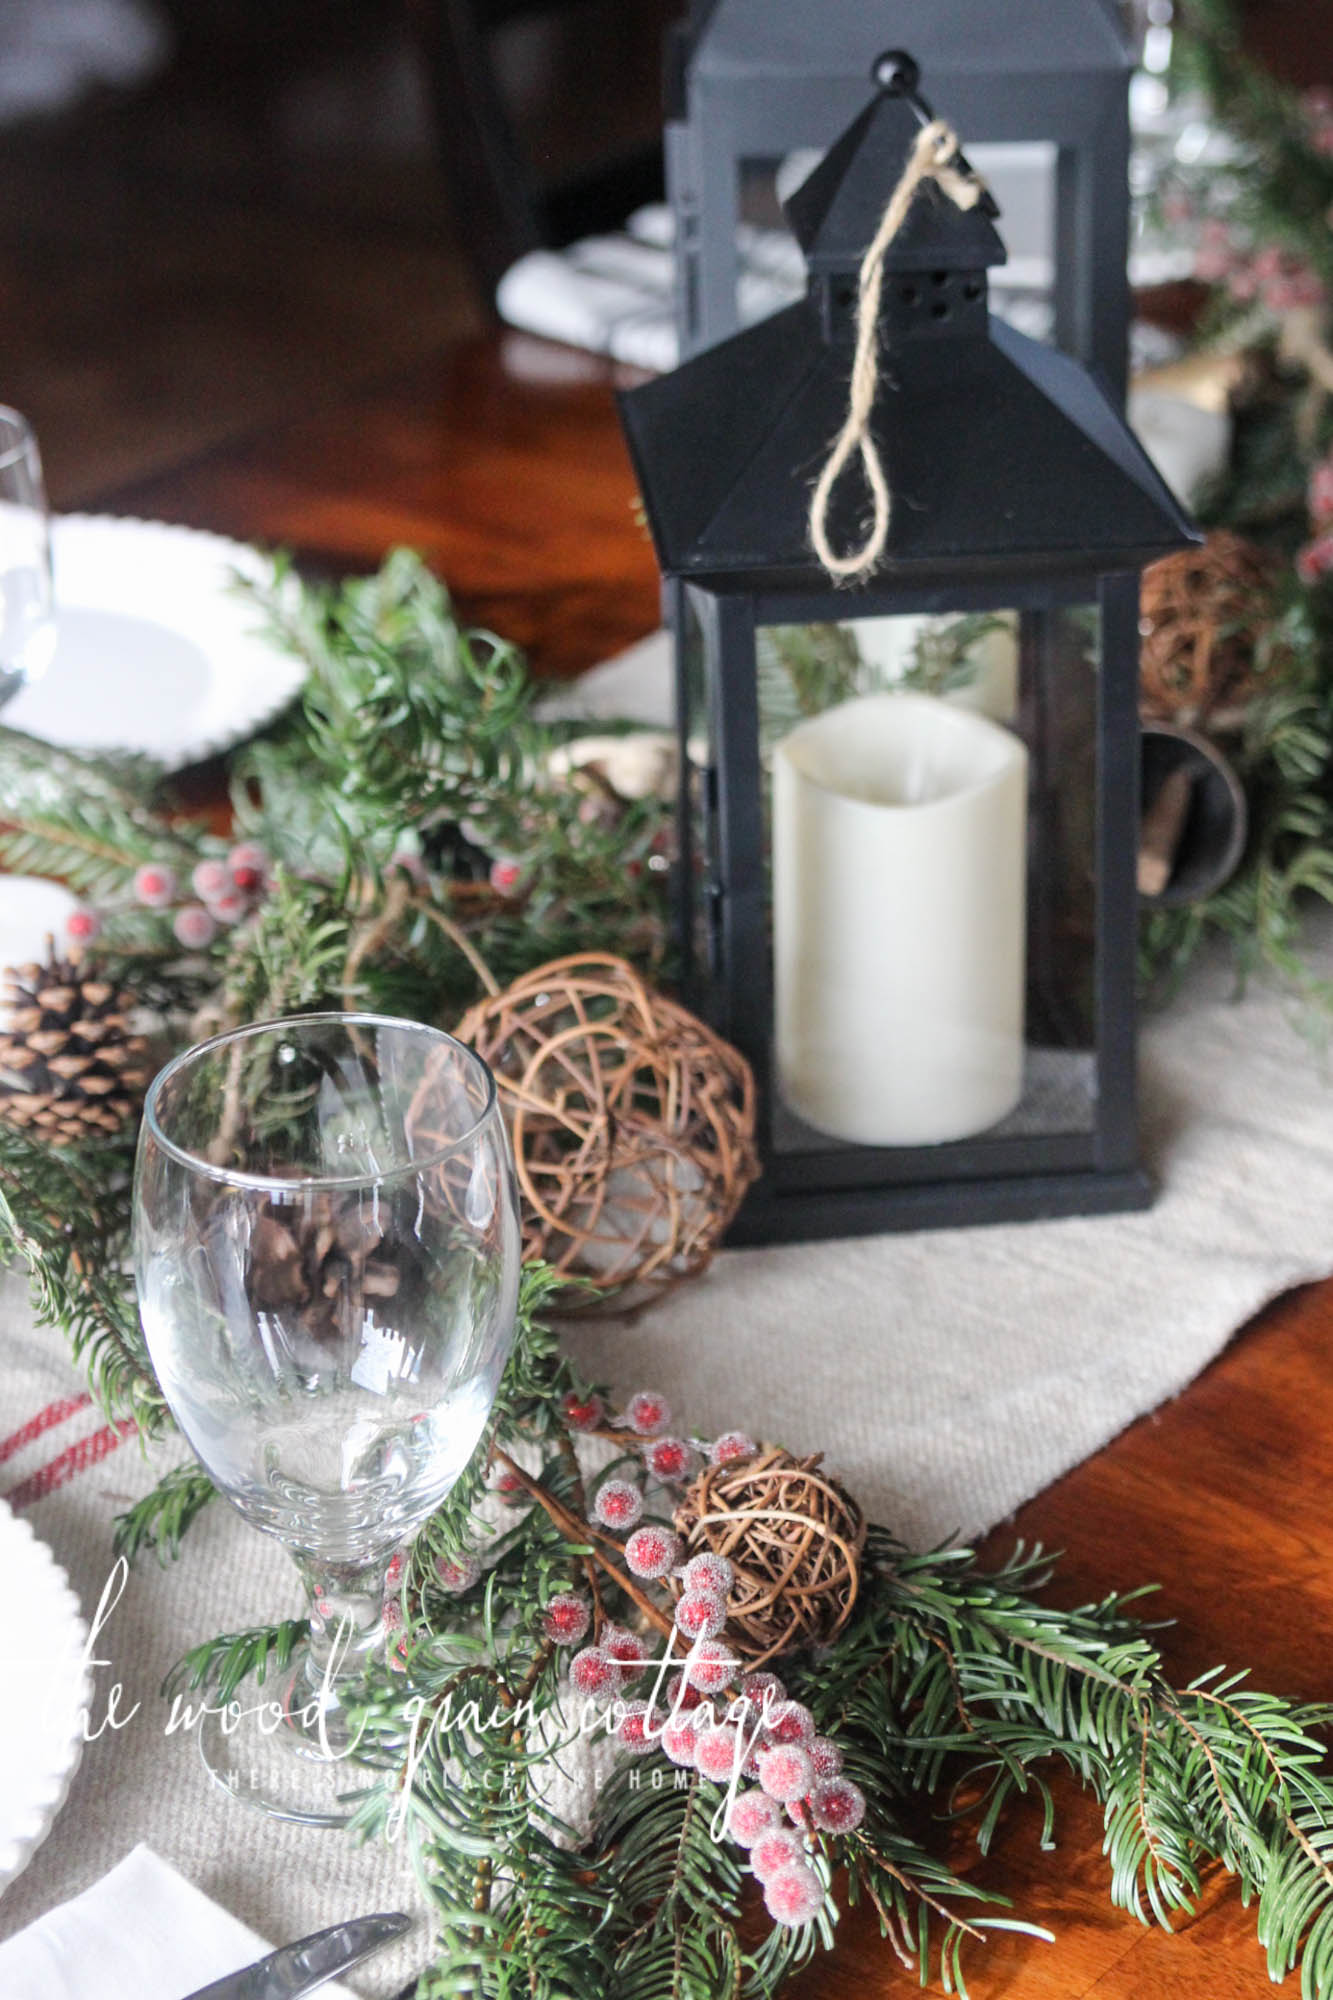 Our Christmas Table - The Wood Grain Cottage